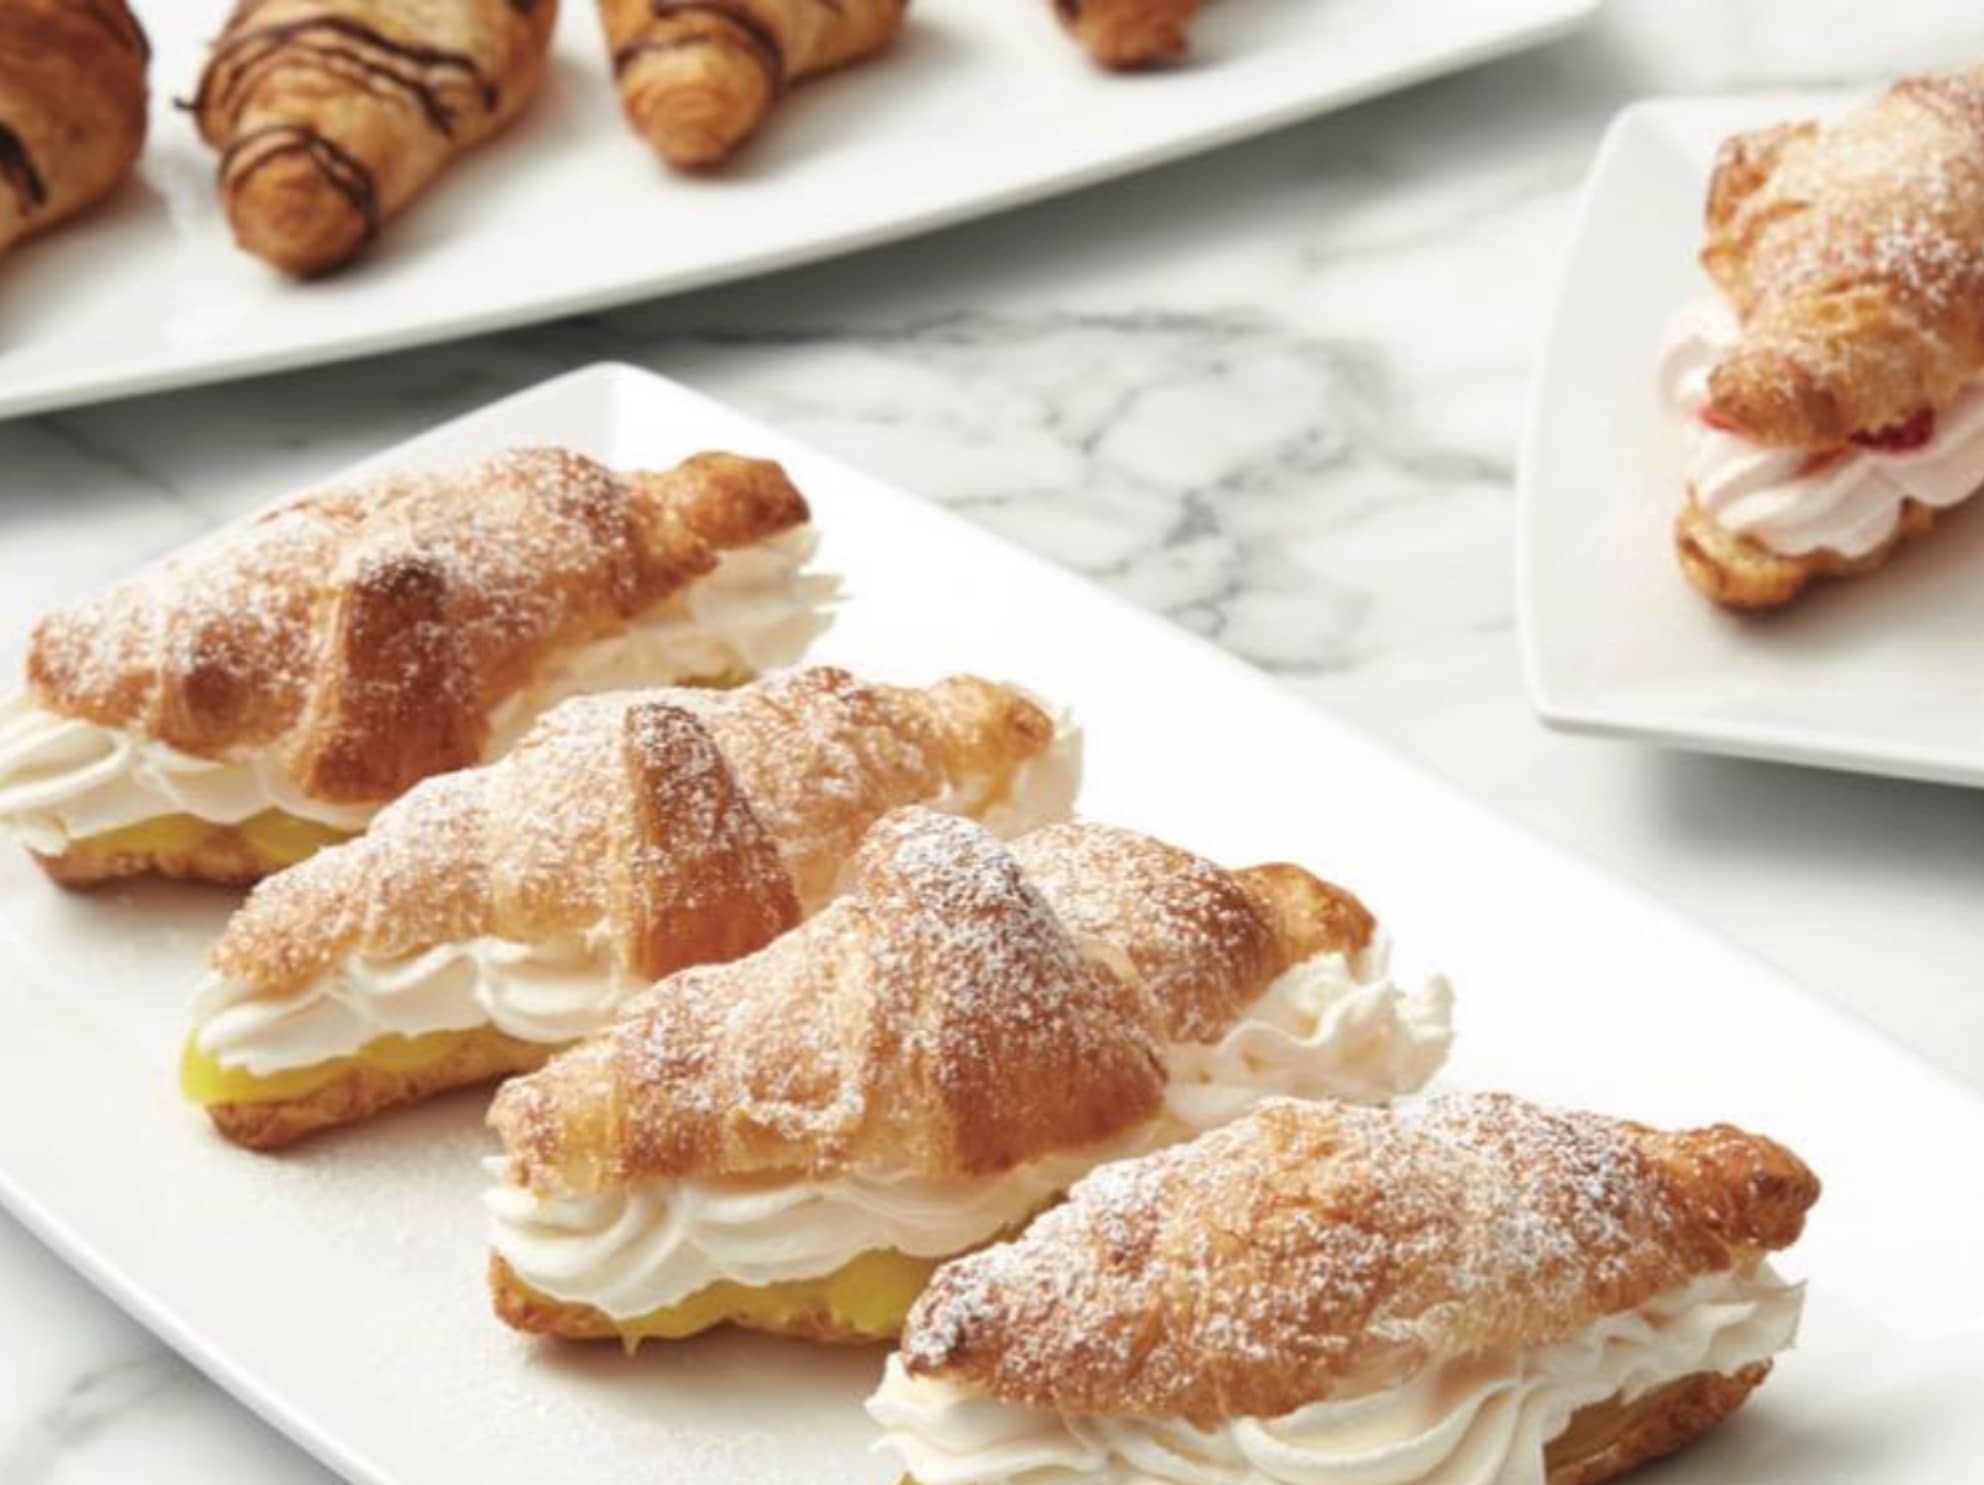 Flawless croissants from the freezer - General Mills